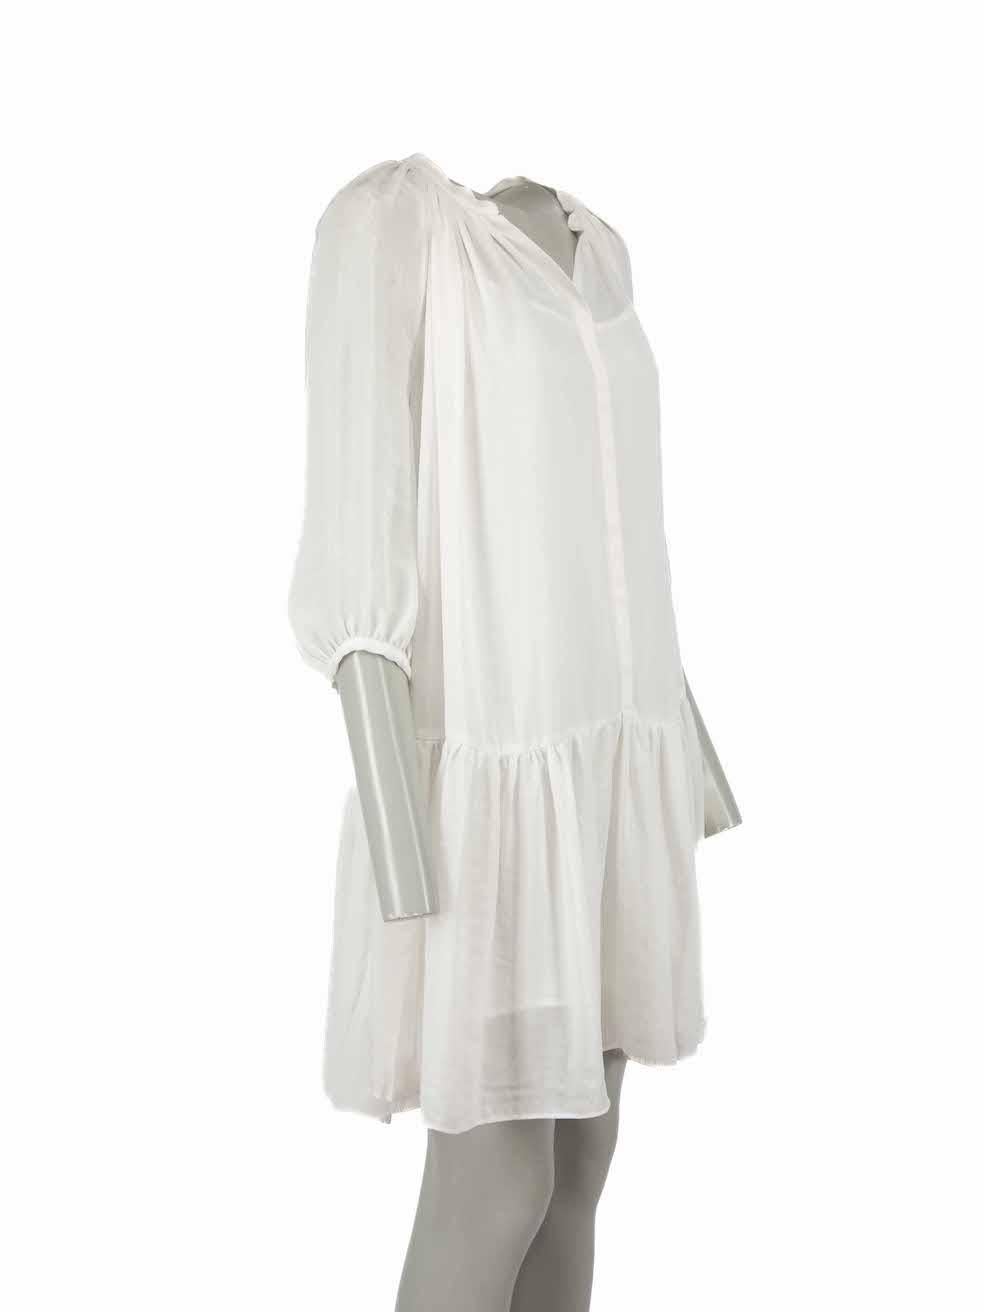 CONDITION is Very good. Hardly any visible wear to dress is evident on this used Sandro designer resale item.

Details
White
Polyester
Shirt dress
V-neck
Ruffle skirt
Long sleeves
Button up fastening
Sheer
Comes with slip dress

Made in Tunisia